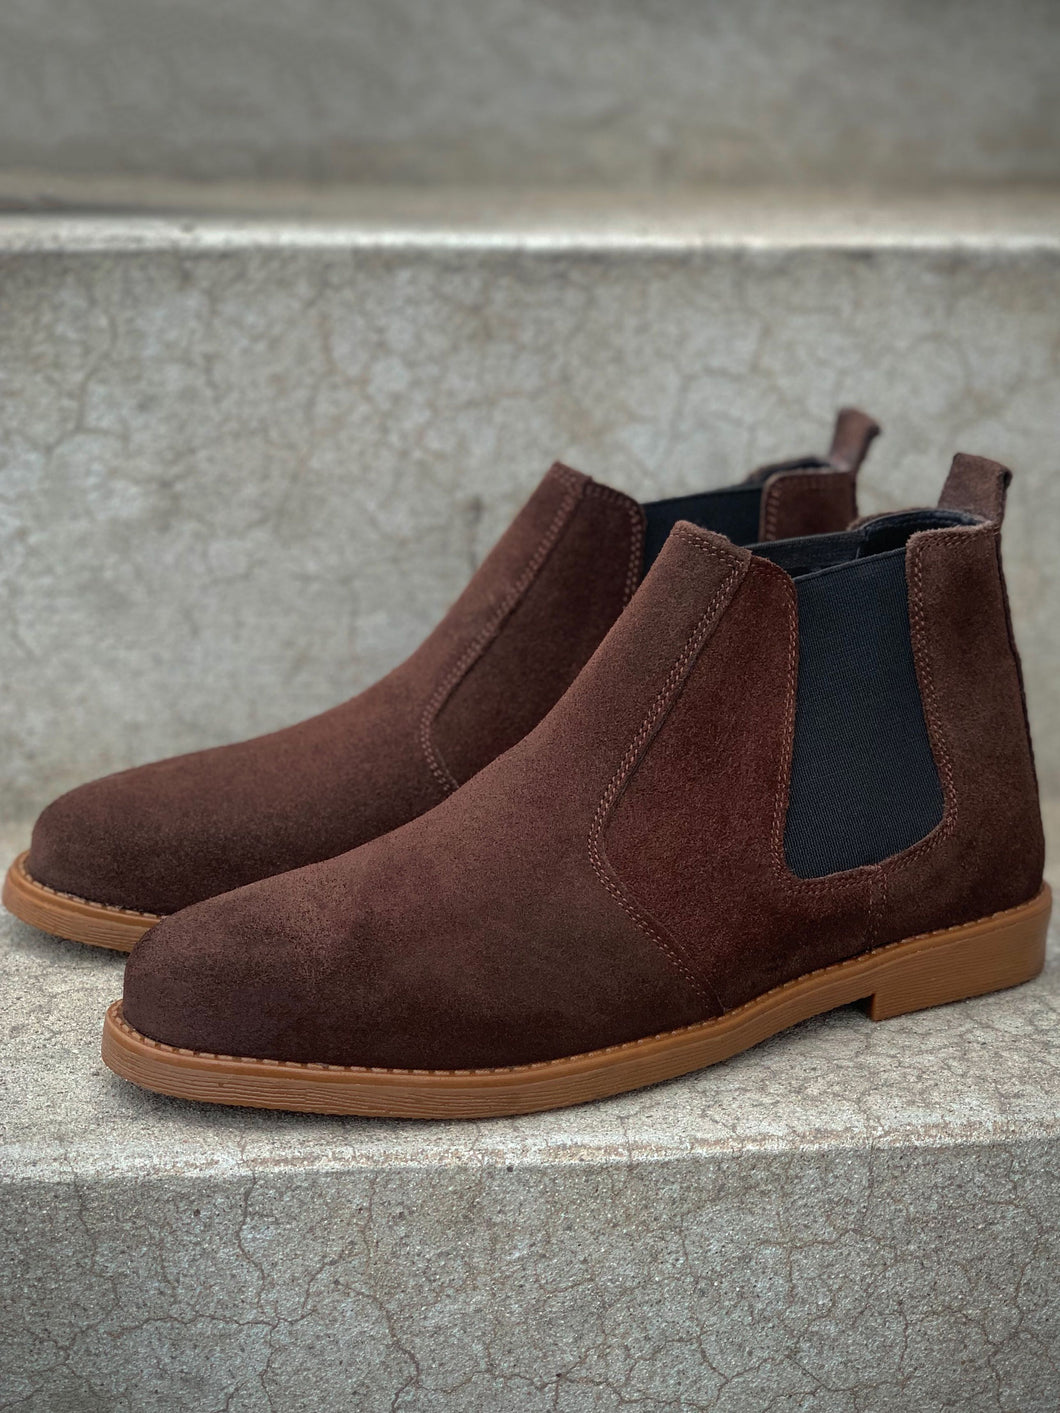 Chocolate Brown Suede Leather Chelsea Boots